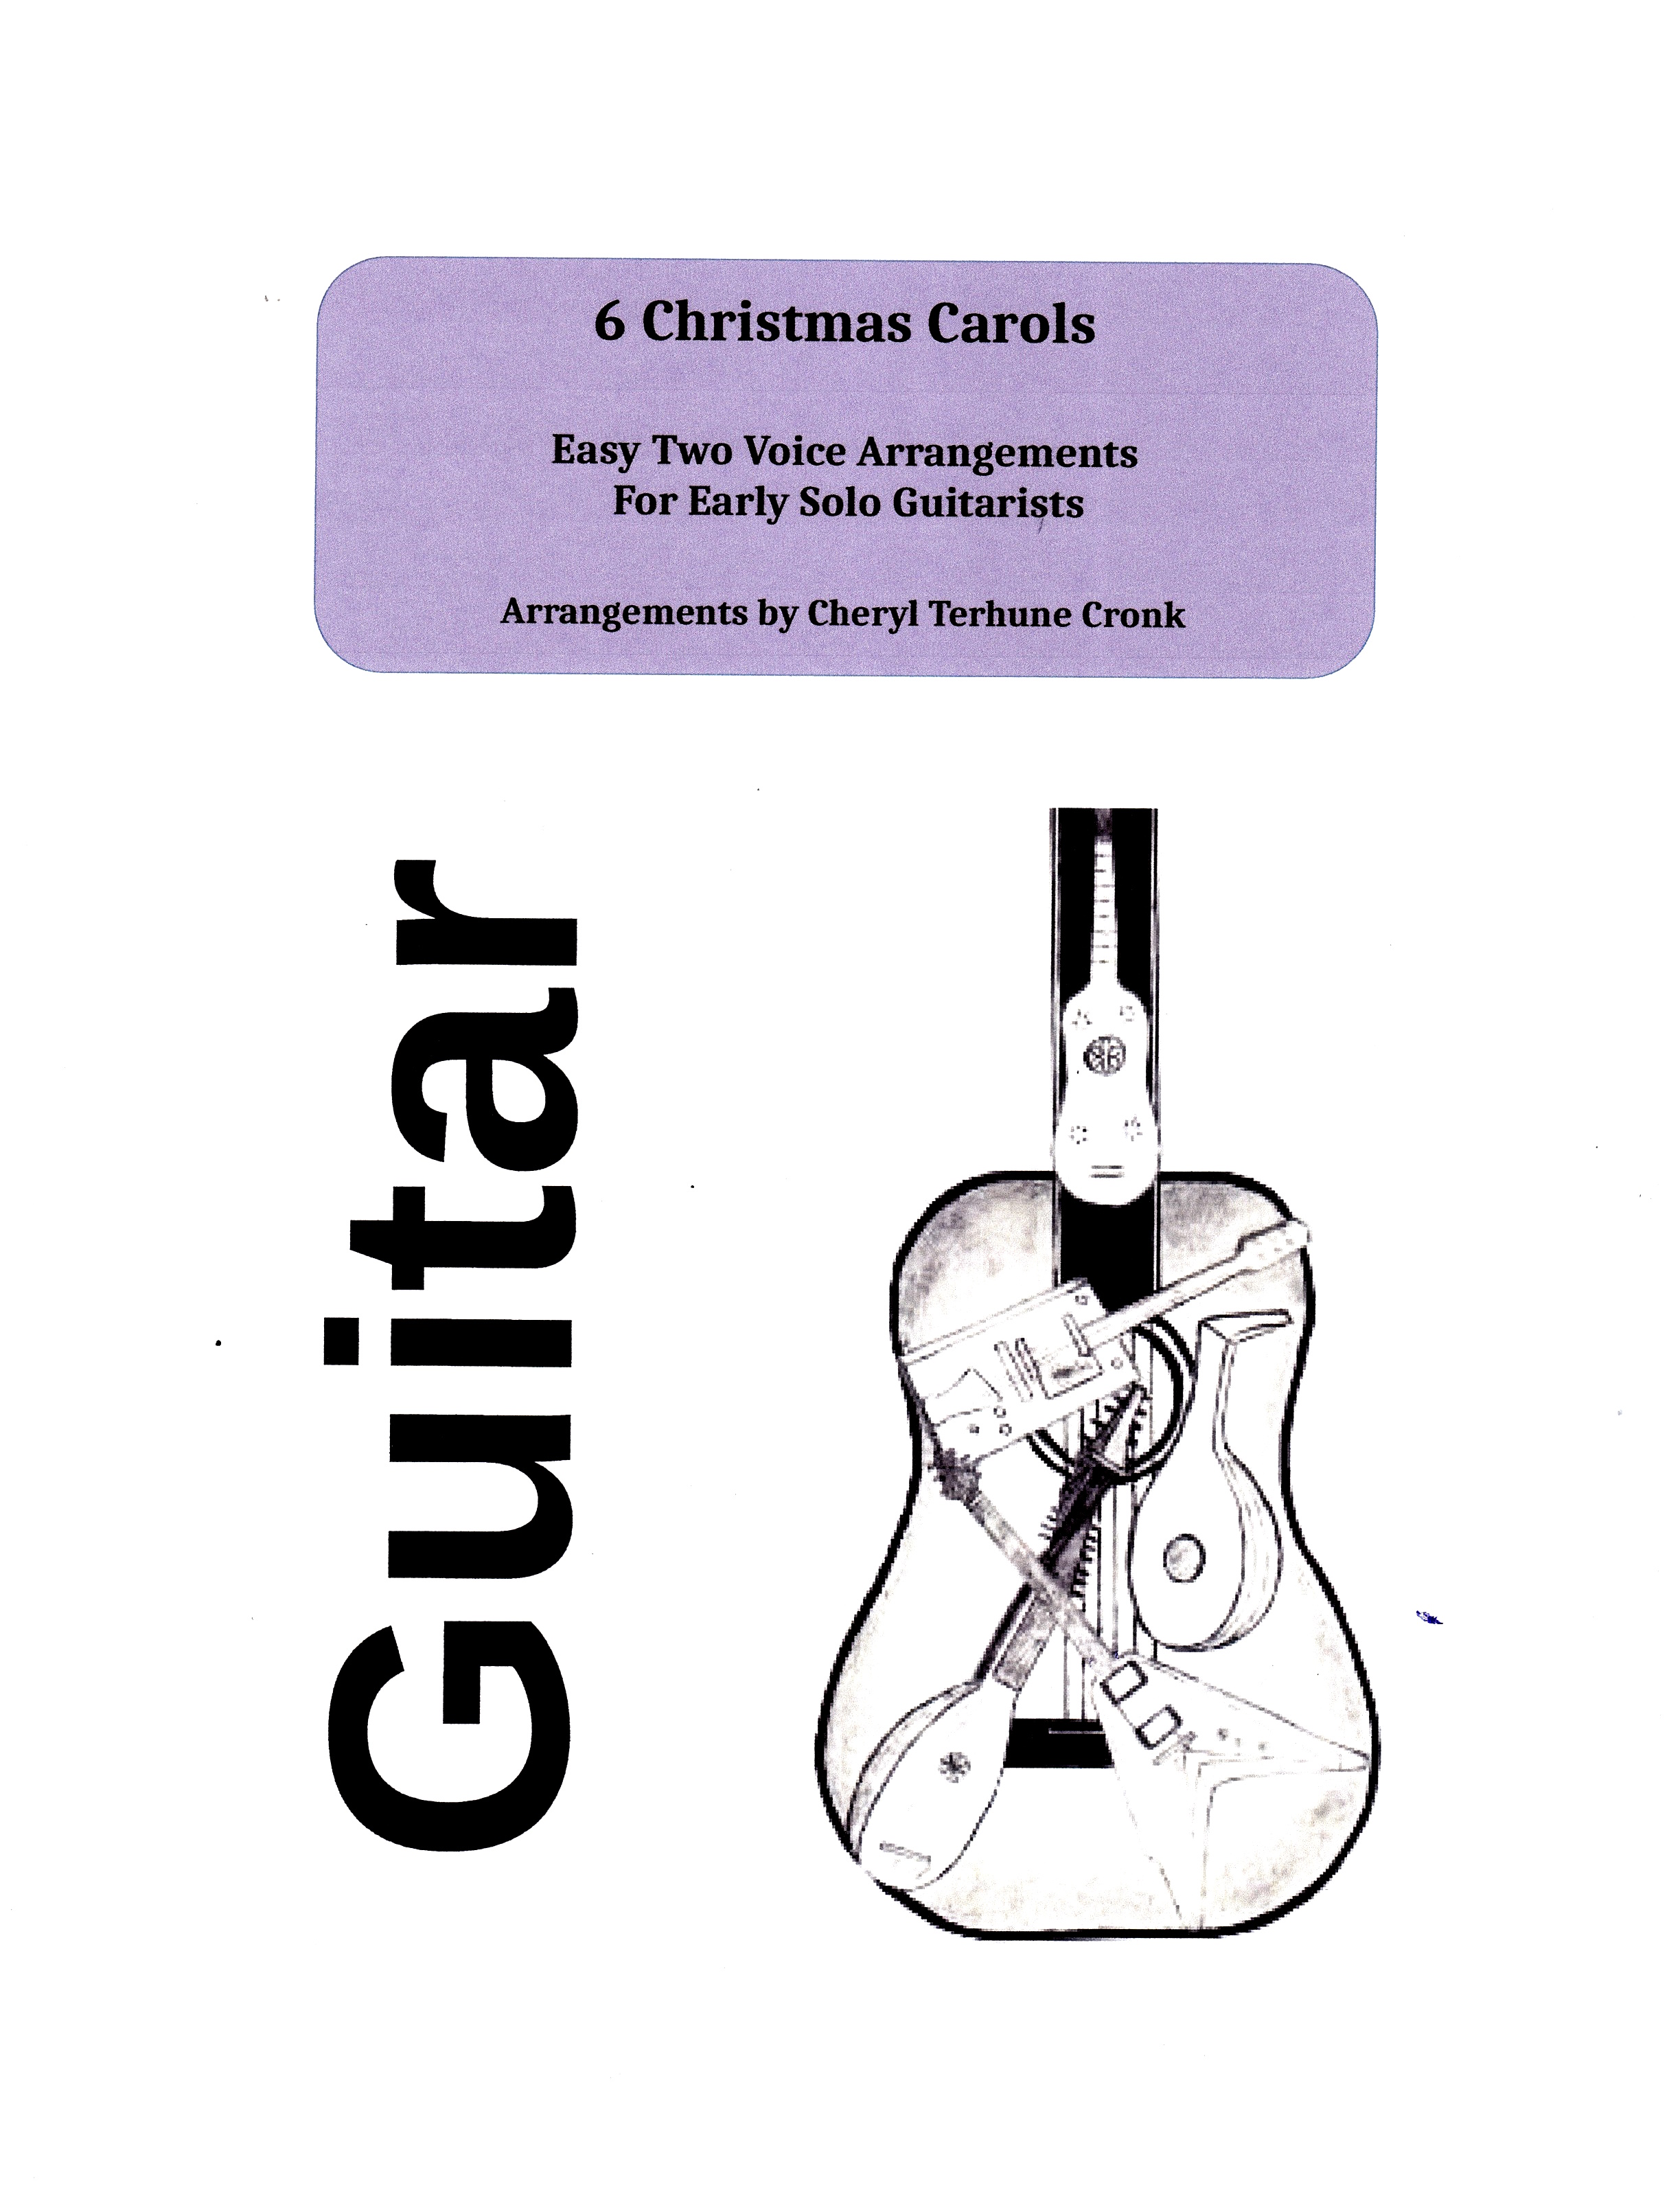 '6 Christmas Carols Easy Two Voice Arrangements for Early Solo Guitarists'